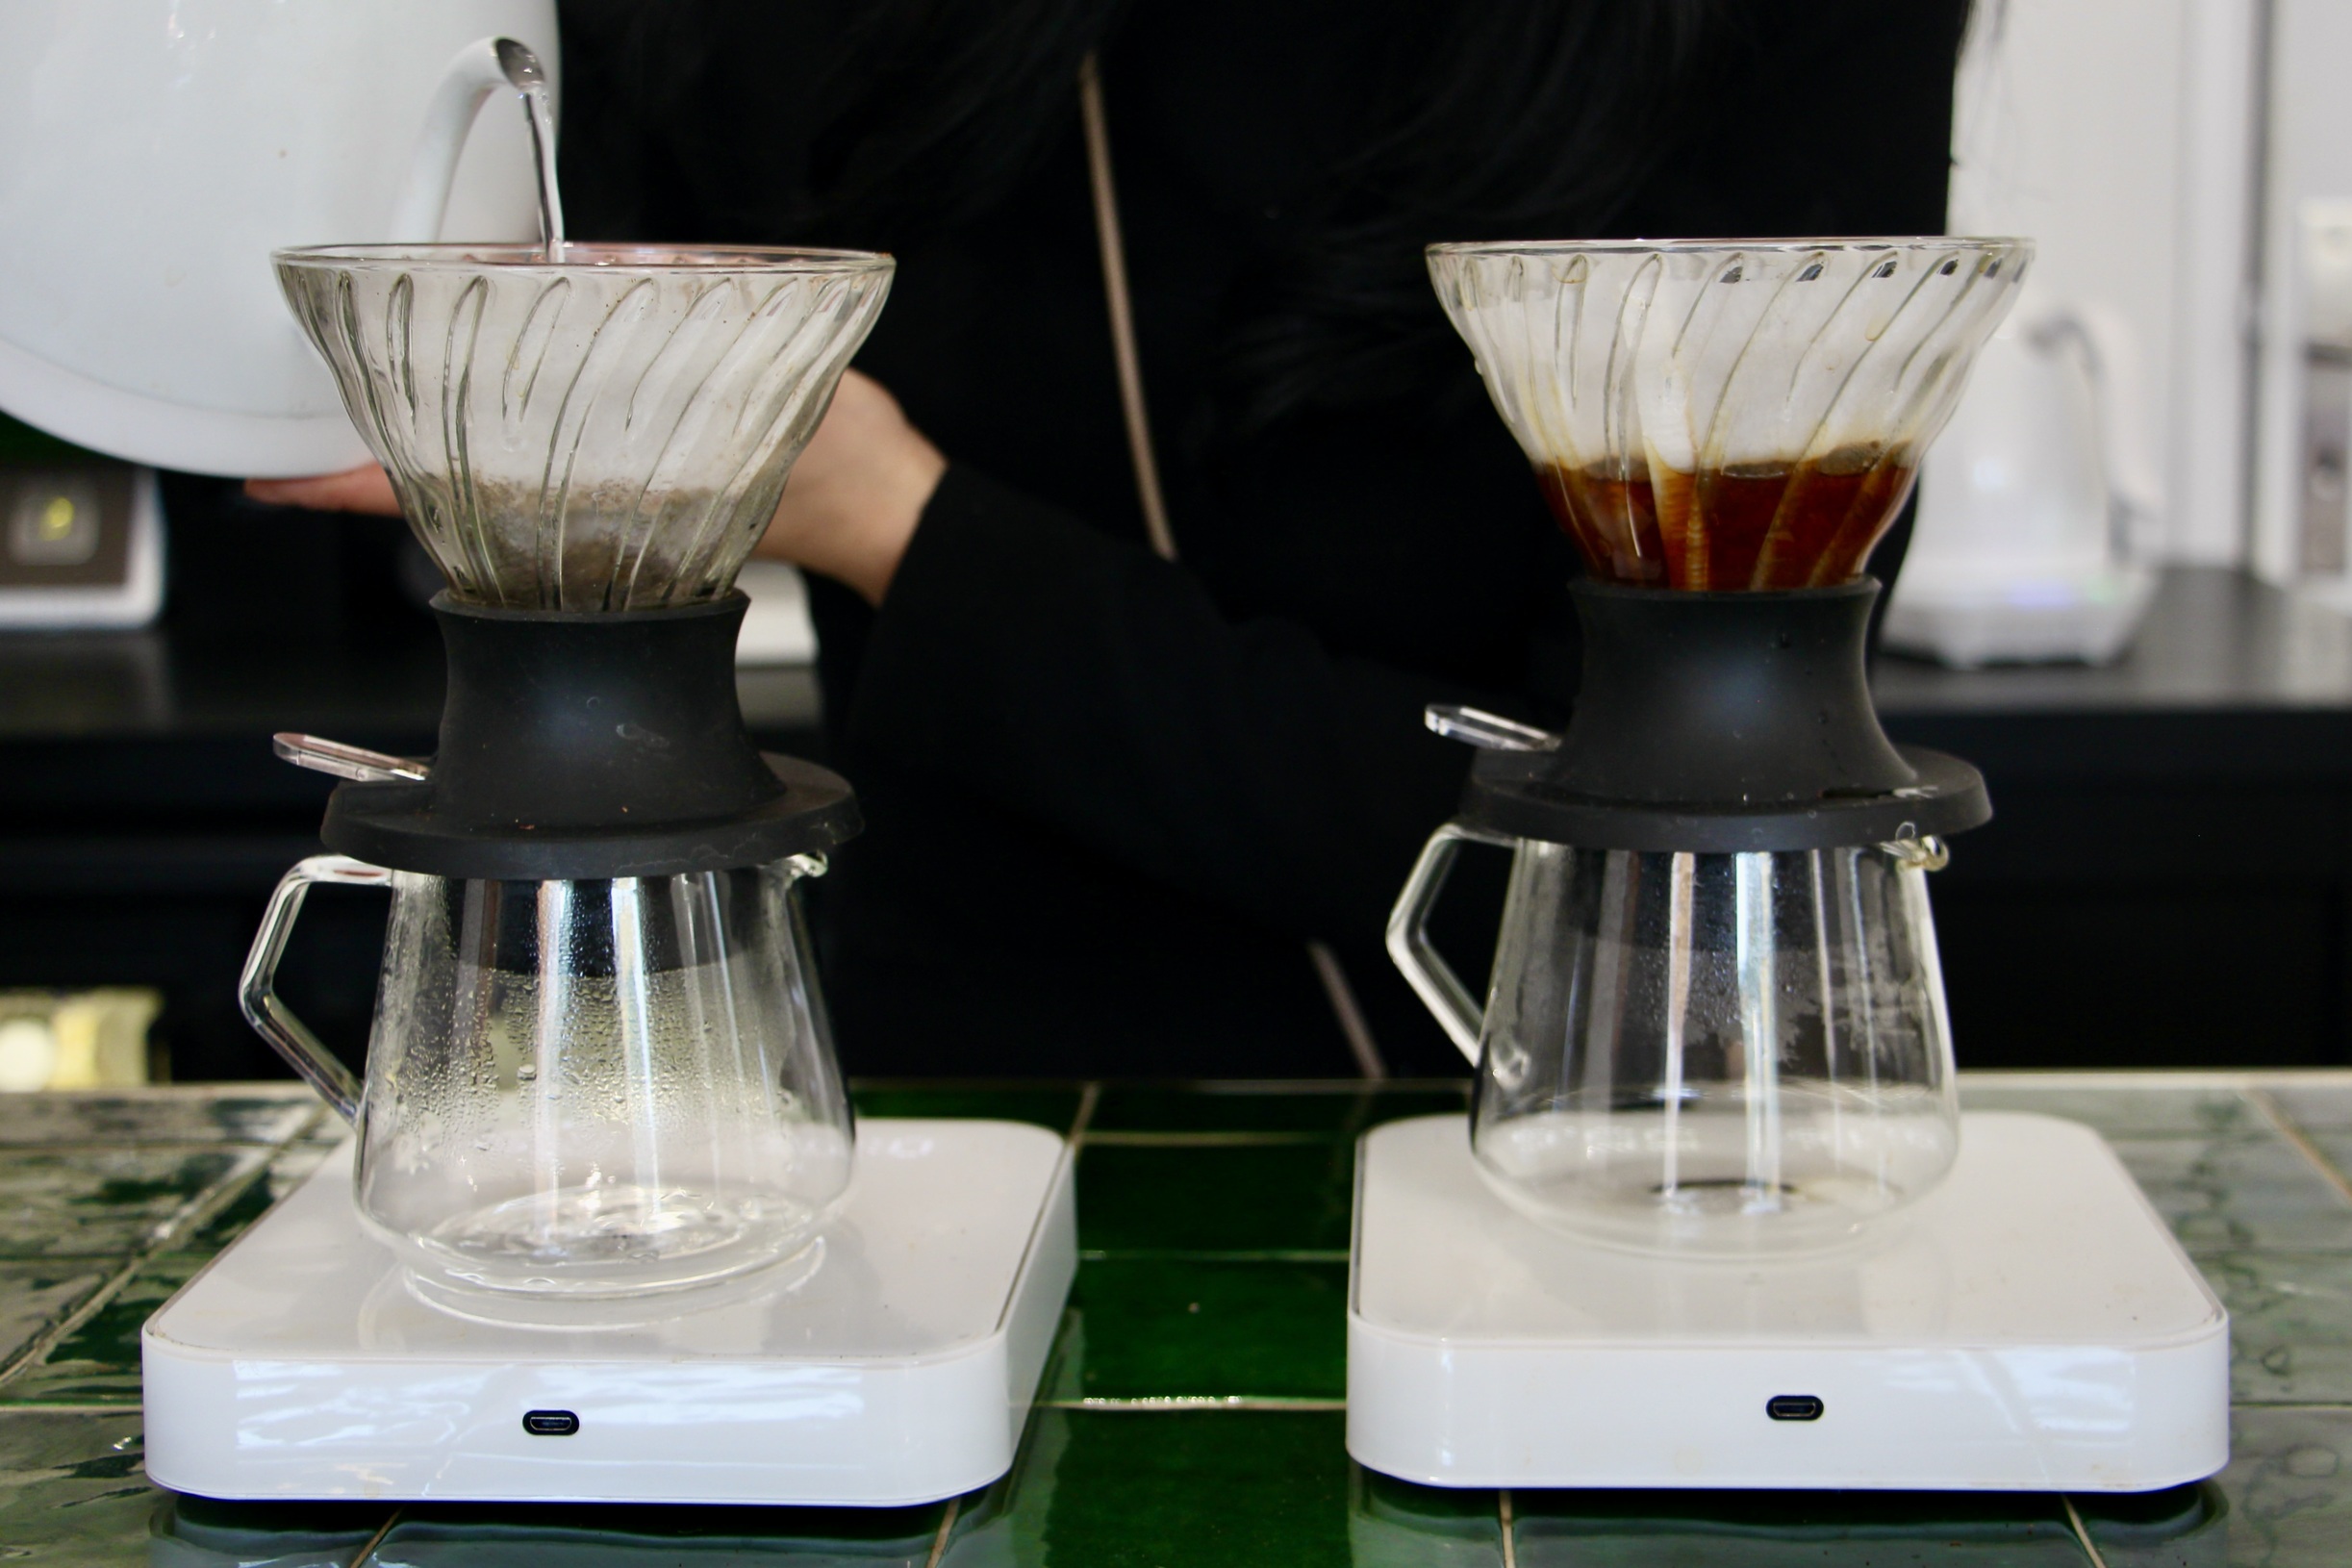 Two coffees in the process of brewing at Moklair.